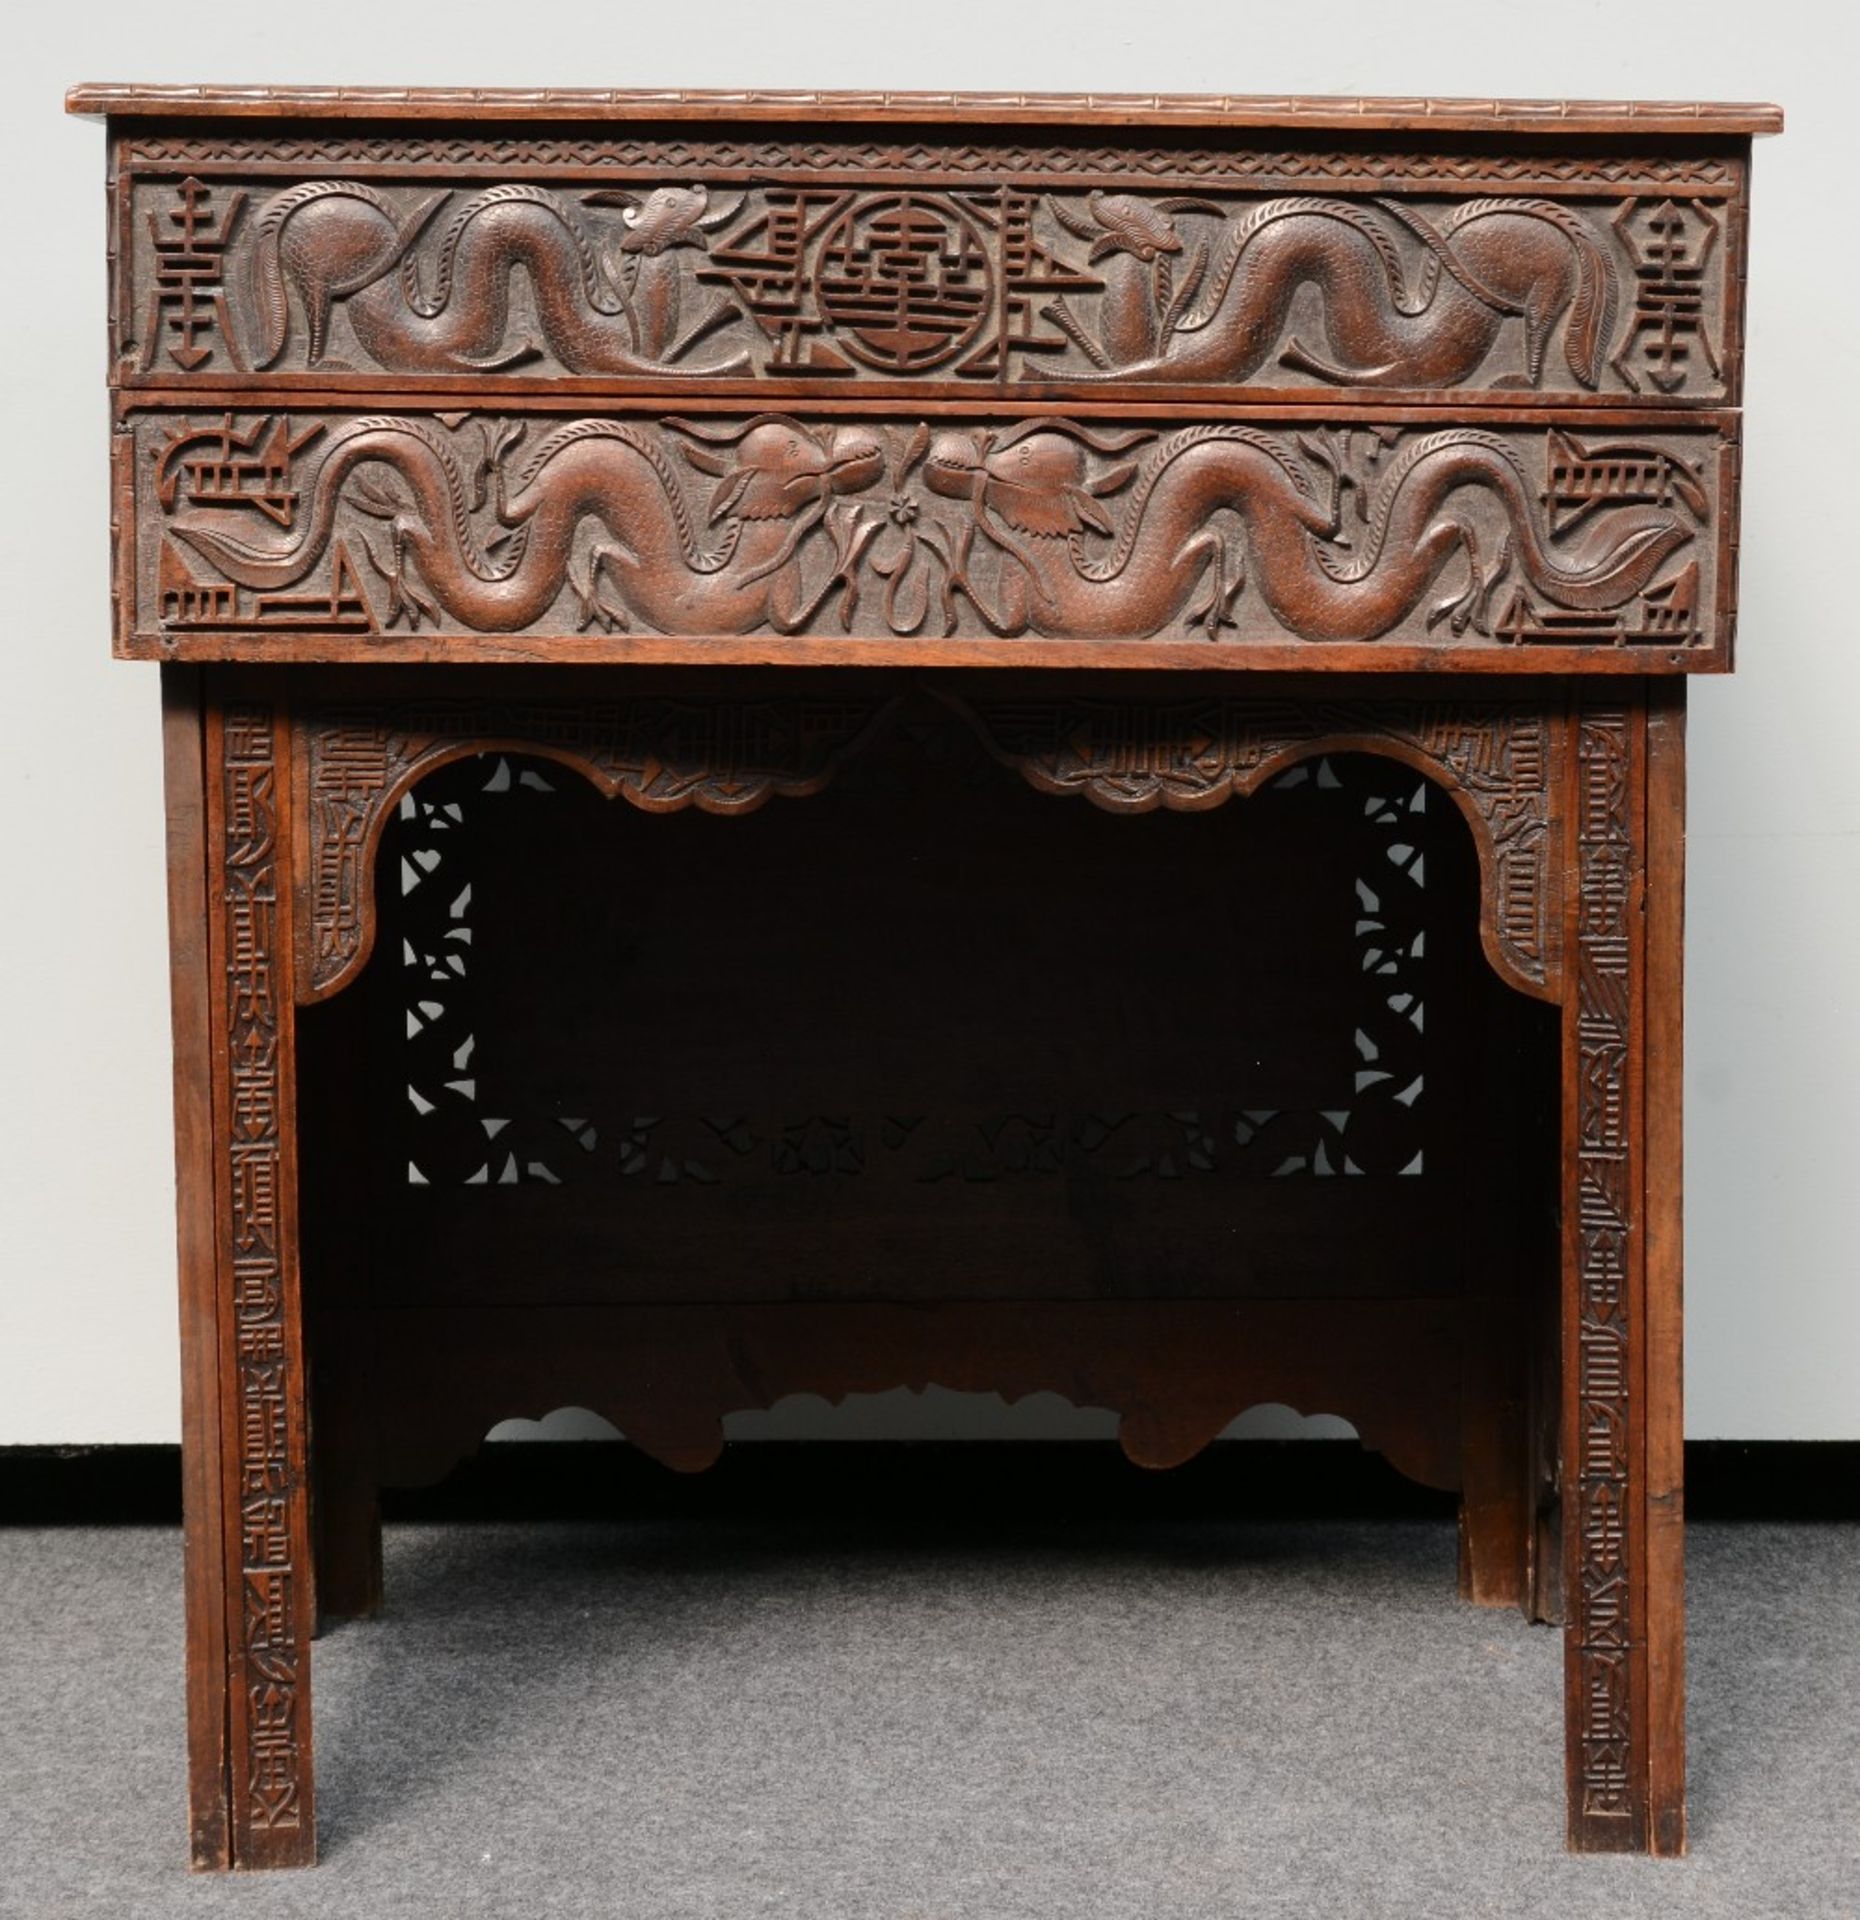 A Chinese carved hardwood travelling desk, relief decorated with dragons and symbols, H 83 - D - Bild 4 aus 8